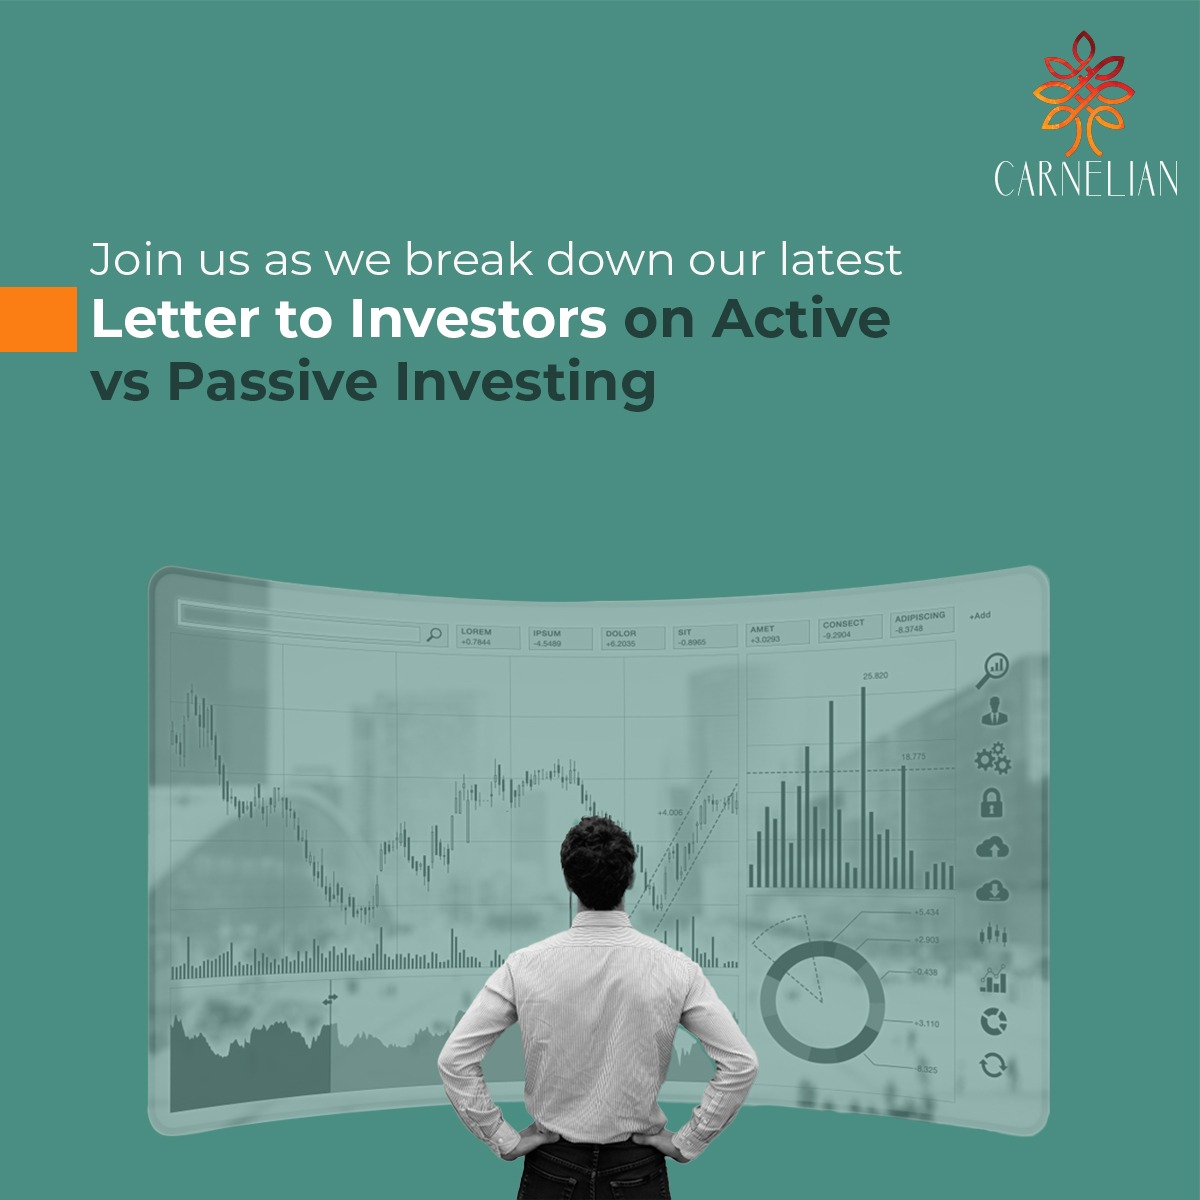 Watch this space for more insights on Active vs. Passive Investing!

#carnelianassetadvisors #stockmarket #activeInvesting #passiveinvesting #assetsmanagment #wealthmanagement #indianmarket #indianeconomy #economy